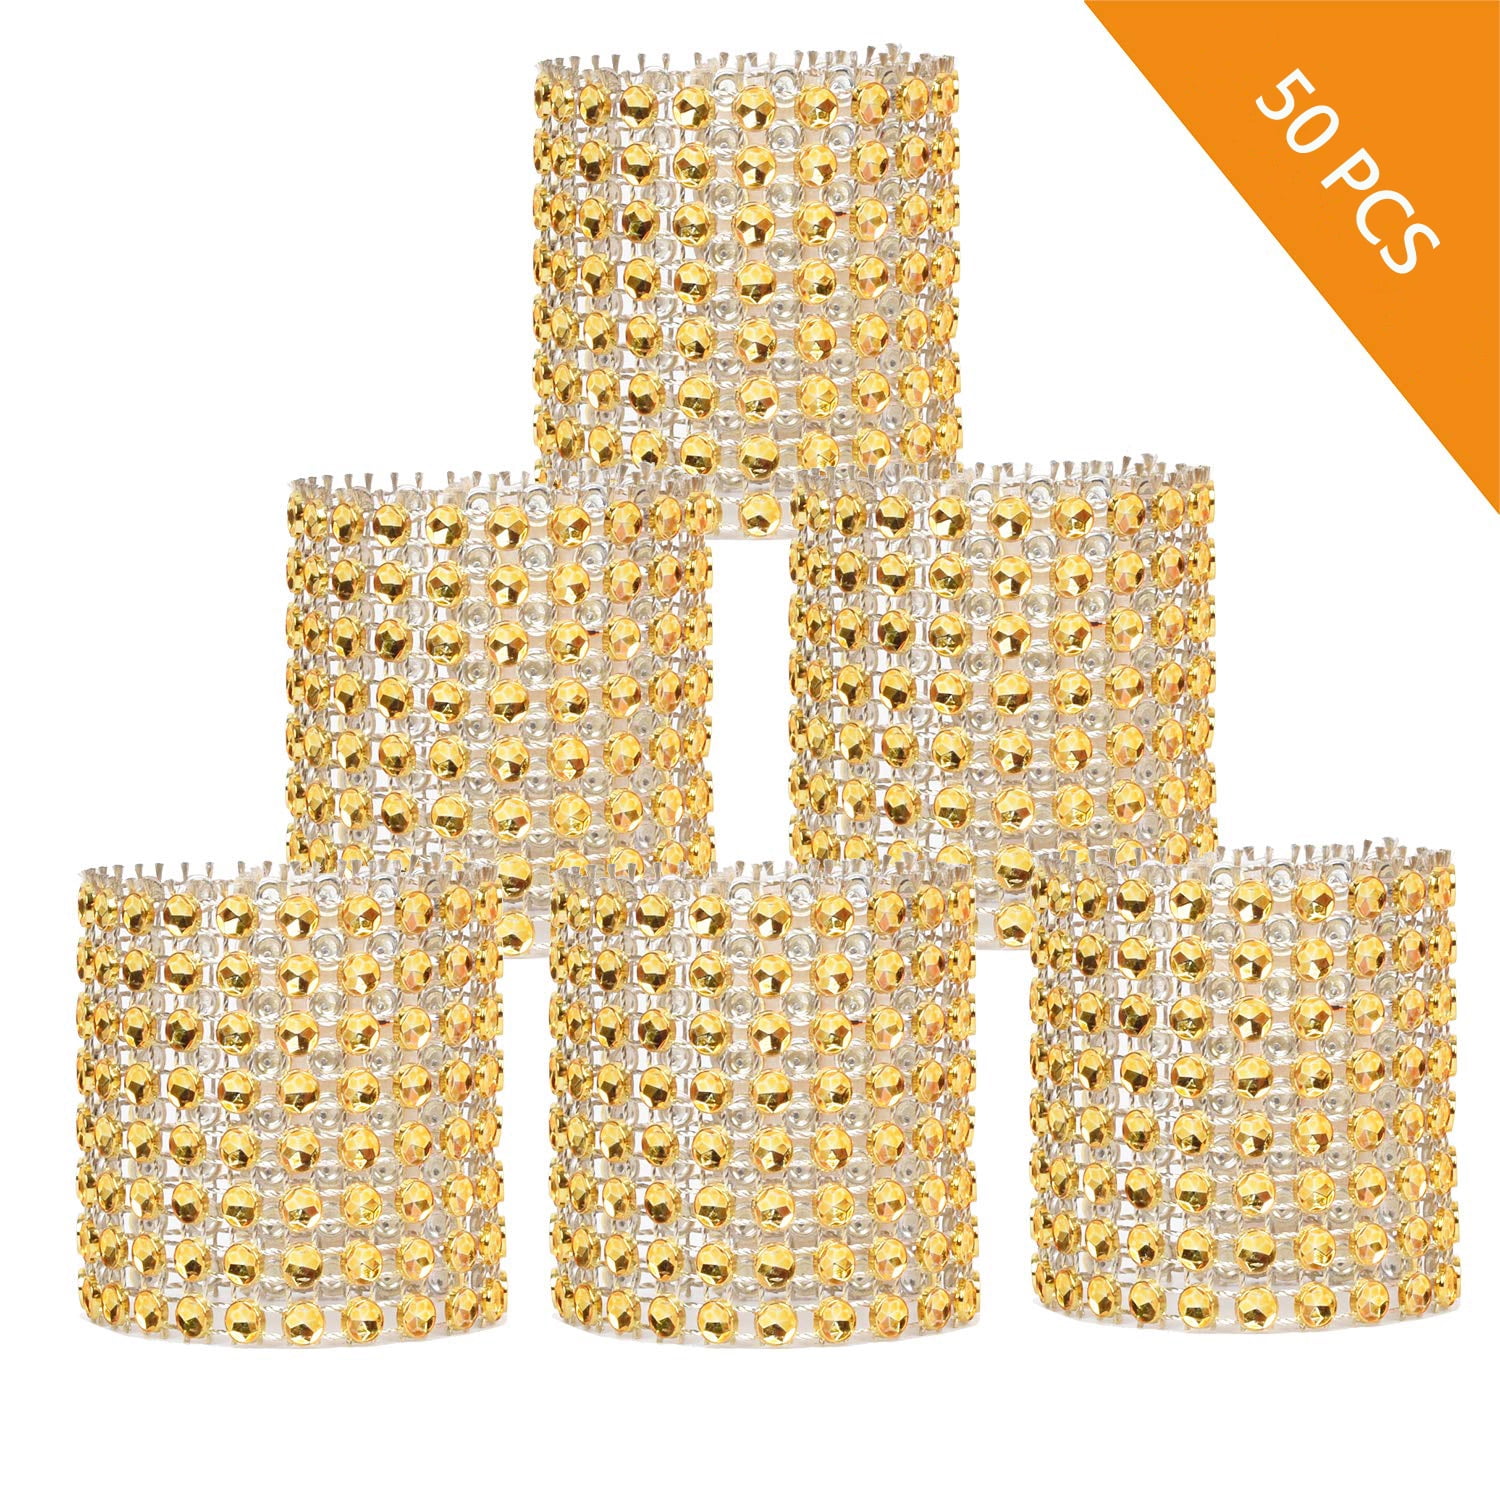 Best offers for large qty only Rhinestone napkin ring 12 pieces .Gold 